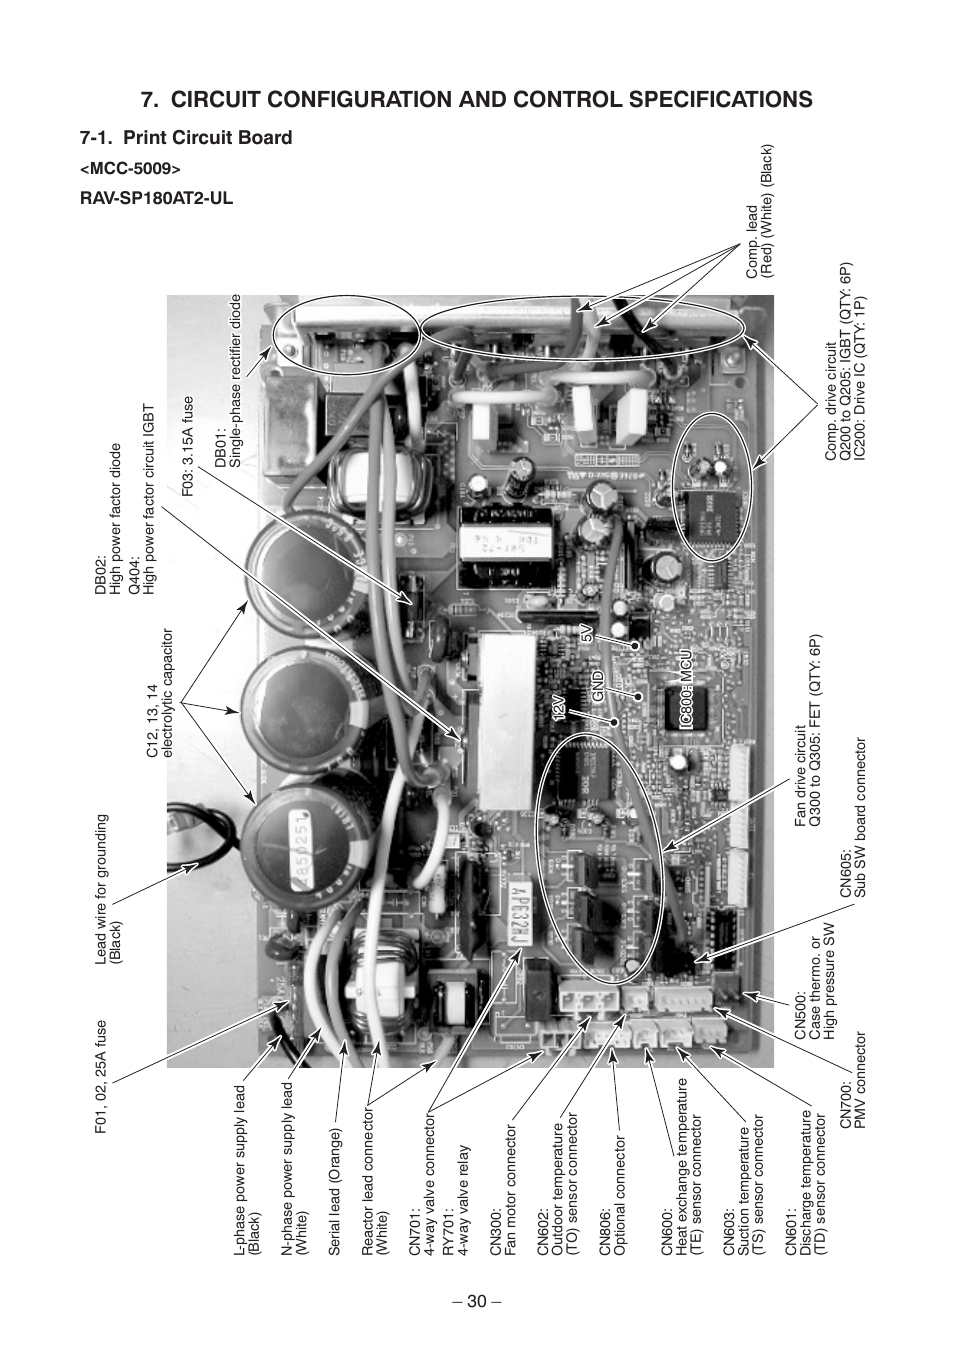 Circuit configuration and control specifications, 1. print circuit board | Toshiba CARRIER RAV-SP300AT2-UL User Manual | Page 30 / 116